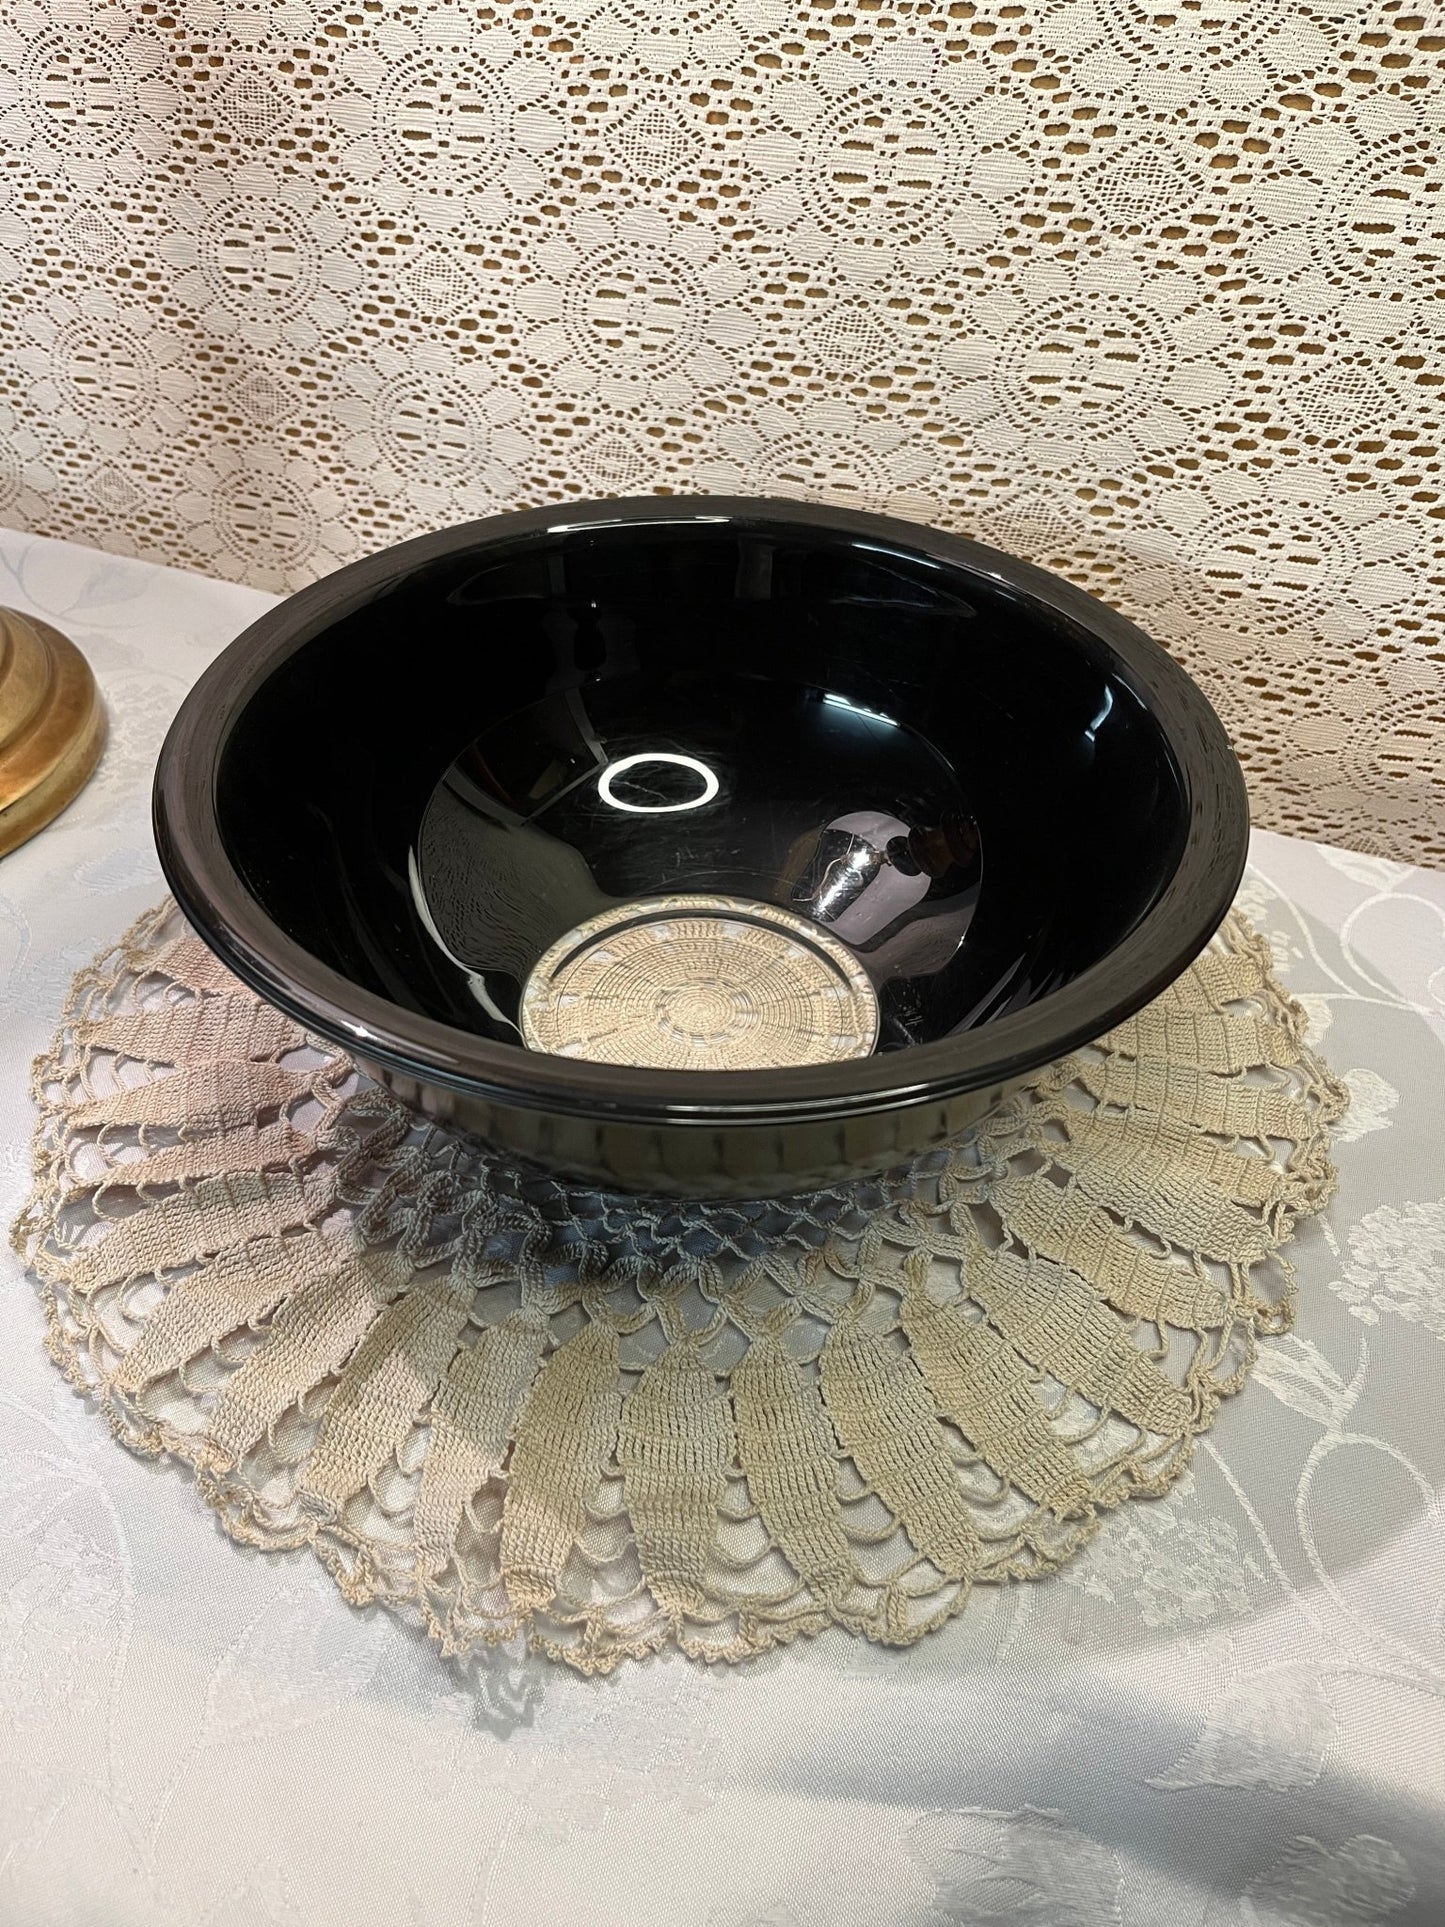 Black and White 3 Piece Pyrex Mixing Bowl Set - Unique Thrifting Chilliwack